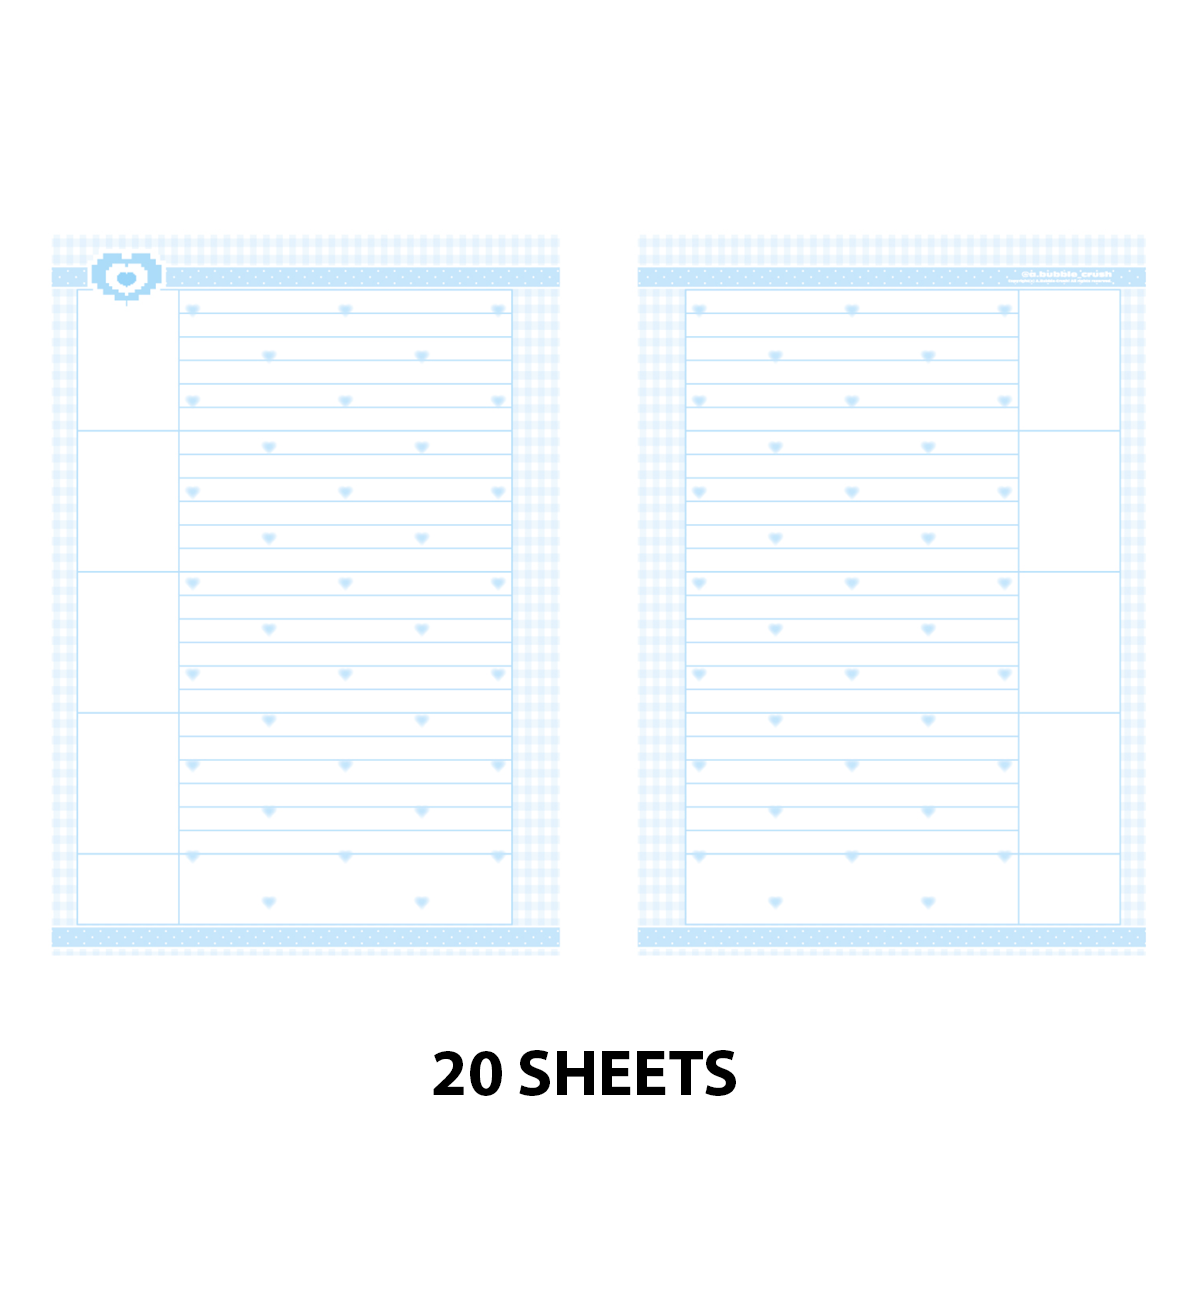 A5 Web Page Paper Refill [Blue]